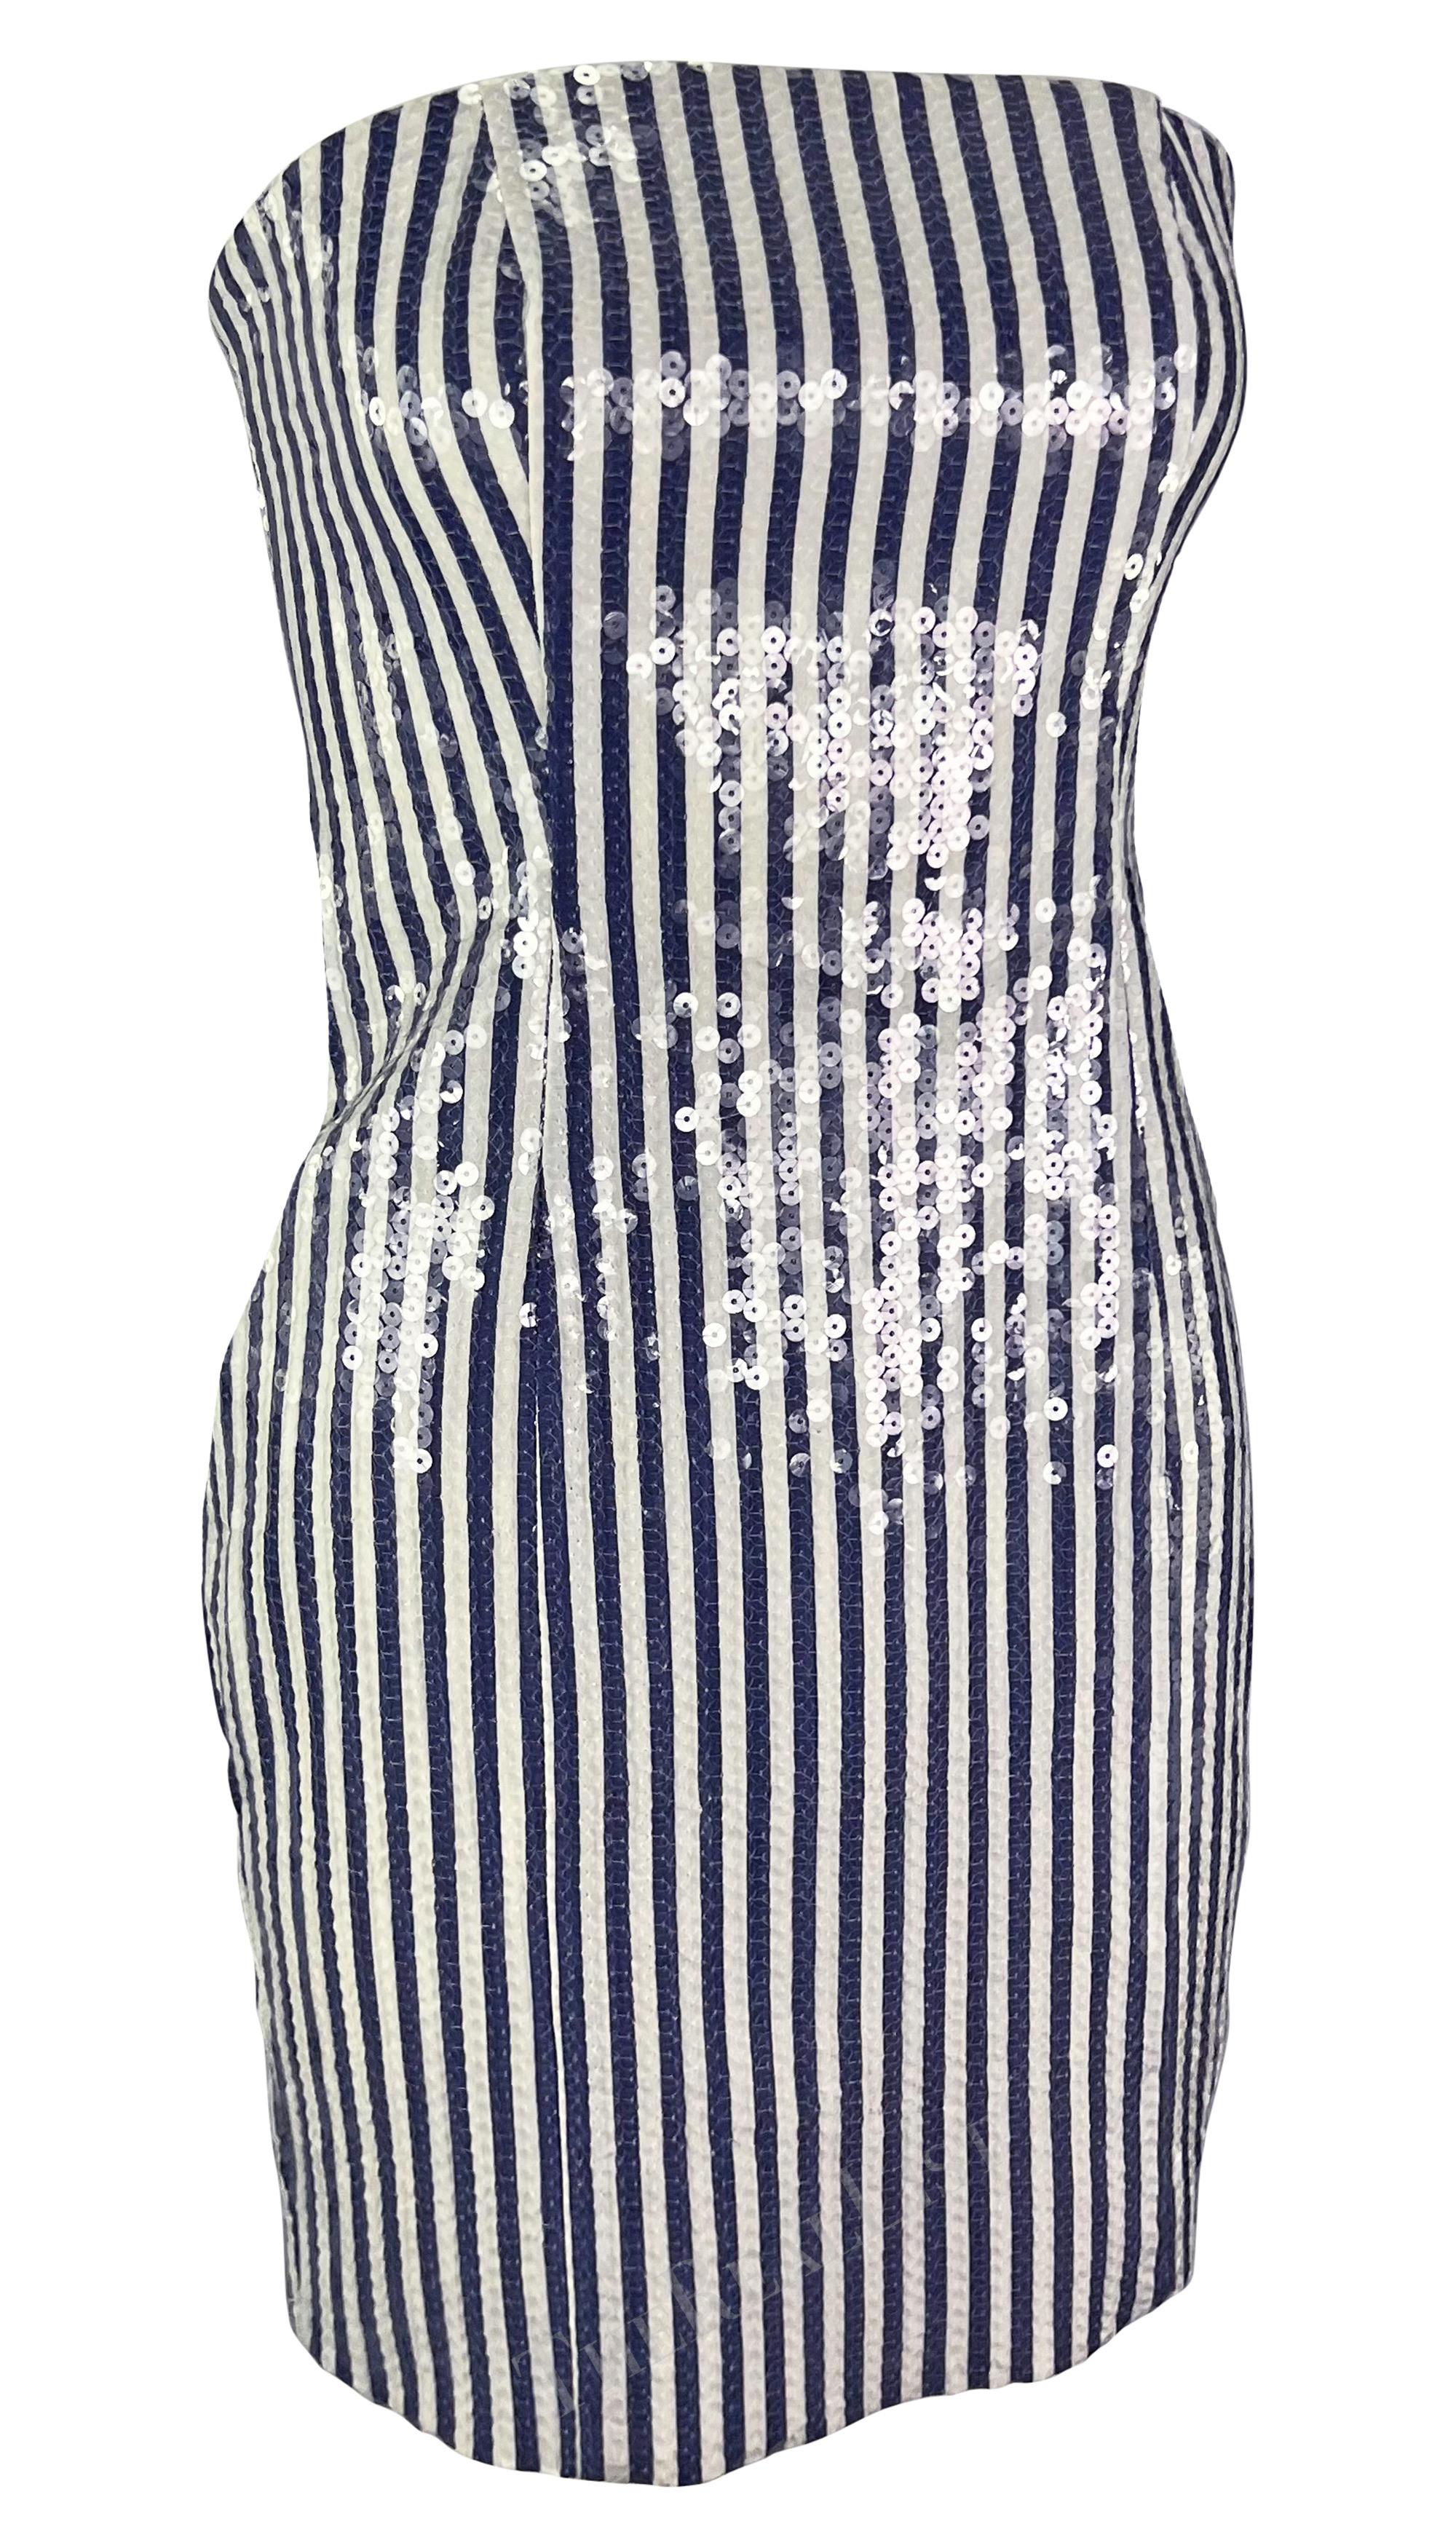 Presenting an incredible blue and white striped Michael Kors strapless mini dress. From the Spring/Summer 1990 collection, a nearly identical version of this mini dress debuted on the season's runway. The dress features a vertical blue and white